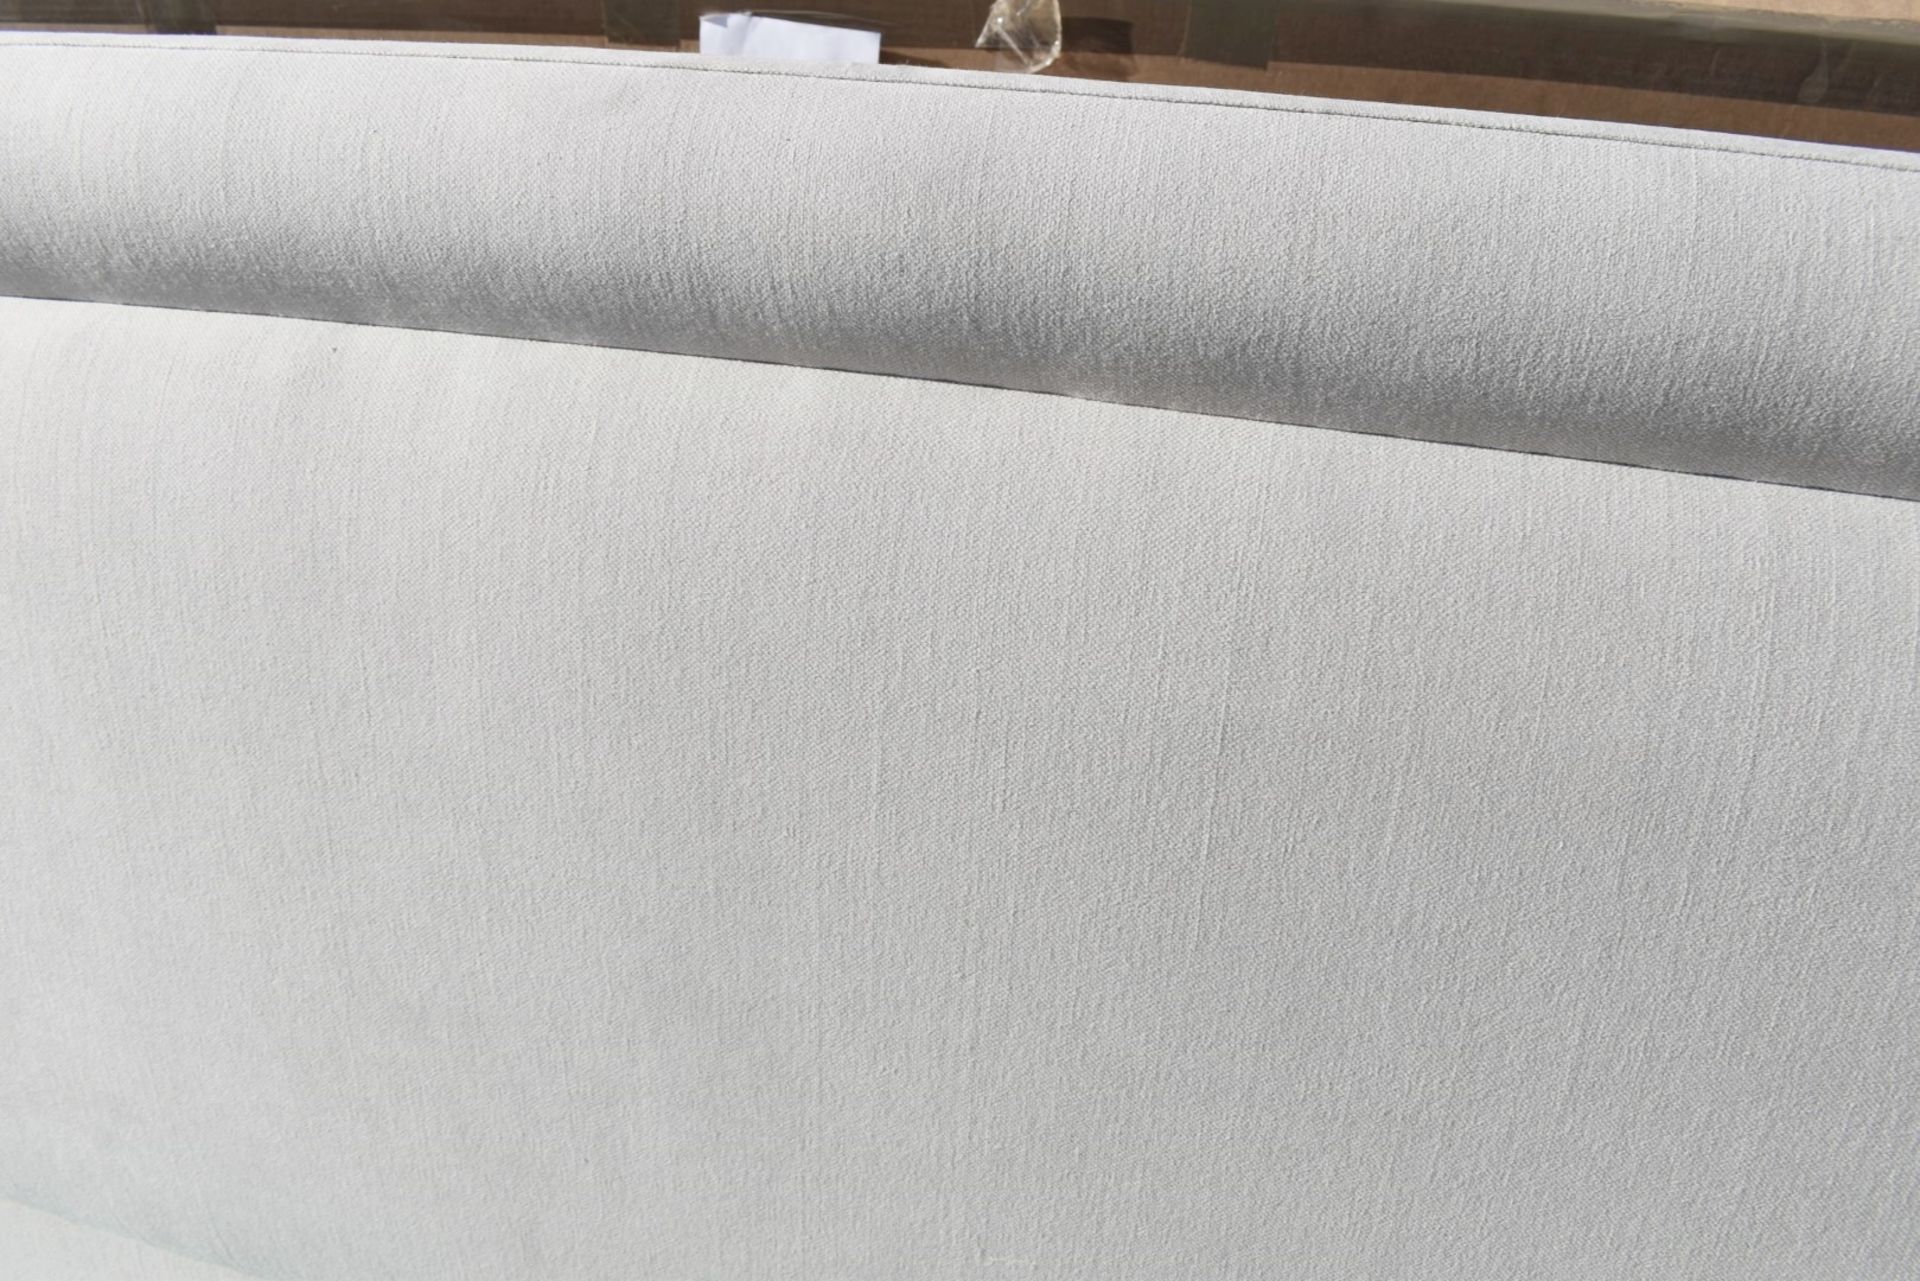 1 x VISPRING 'Helios' Luxury Upholstered Superking Headboard In a Premium Neutral Toned Fabric - Image 6 of 6